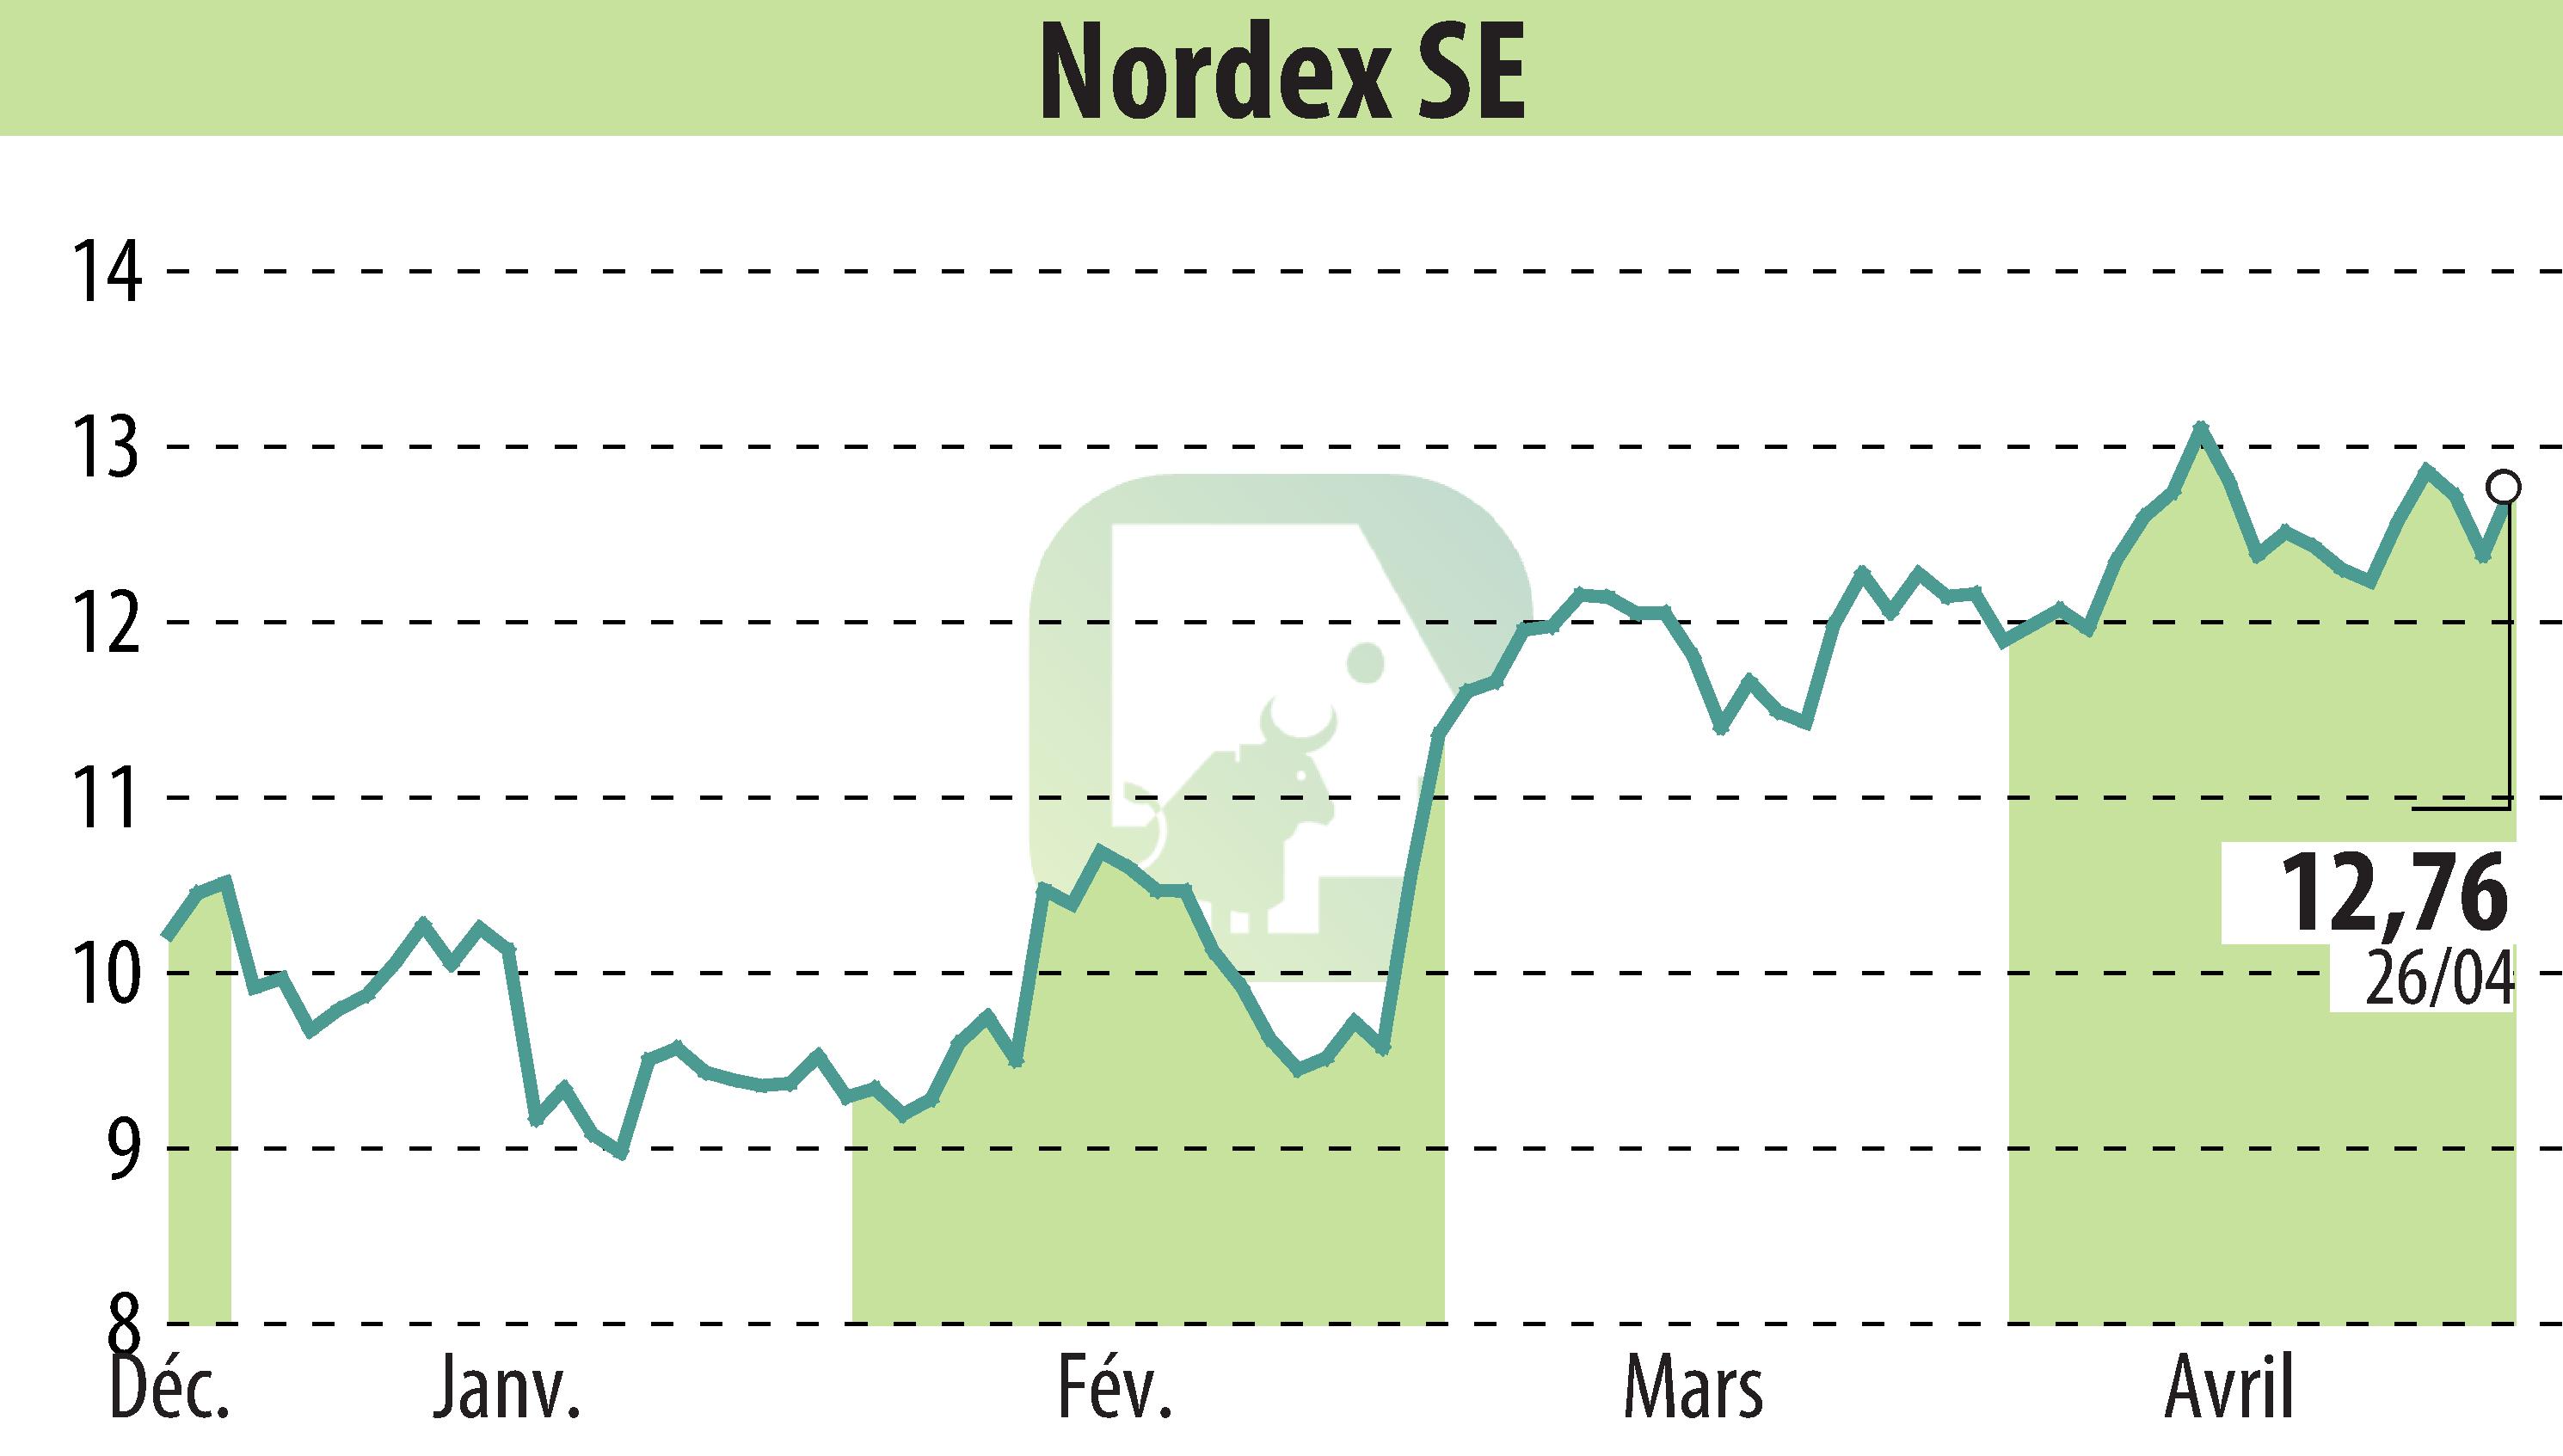 Stock price chart of Nordex SE (EBR:NDX1) showing fluctuations.